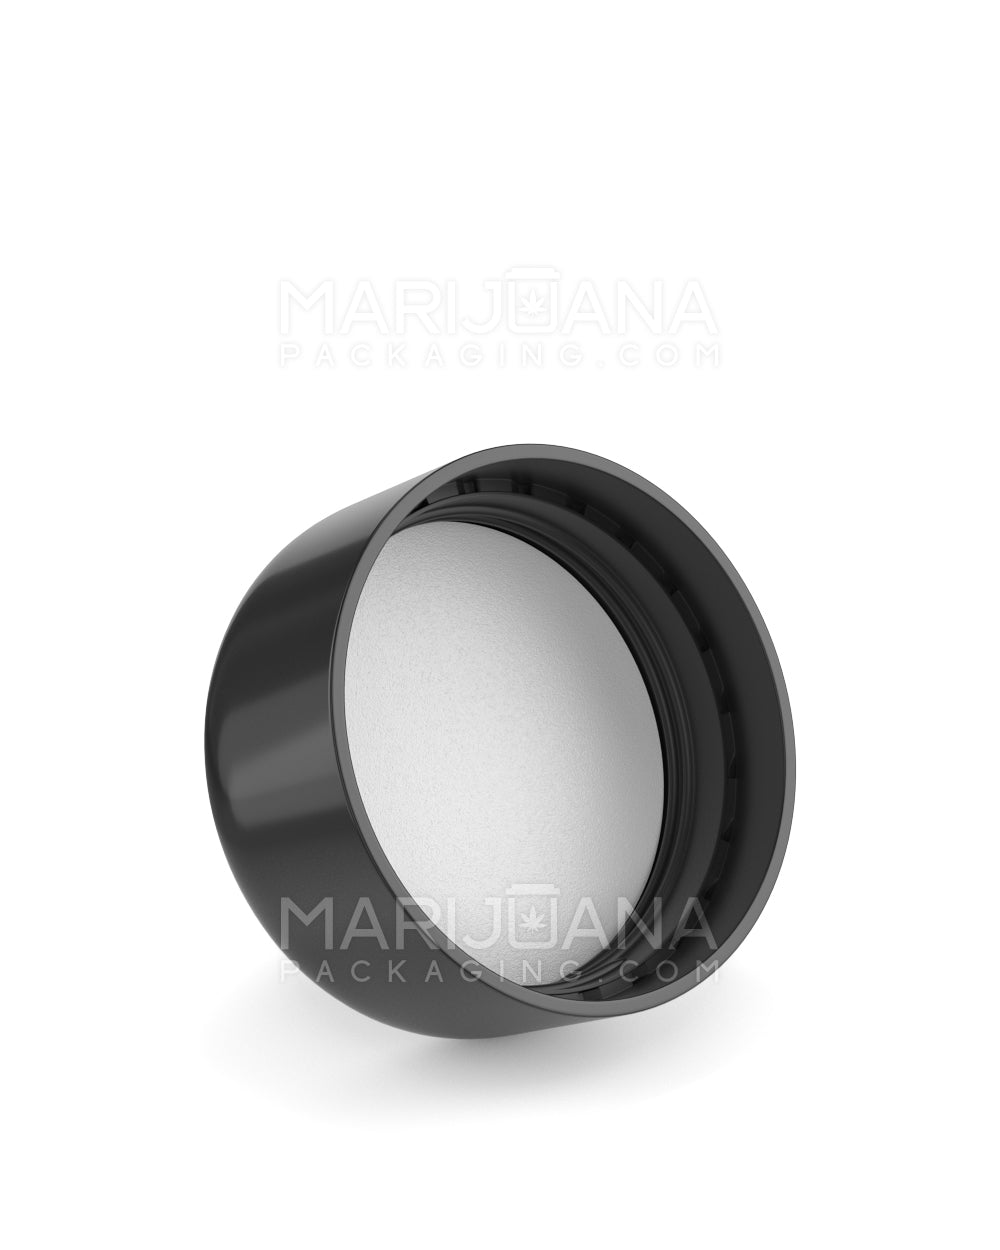 Child Resistant | Dome Push Down & Turn Plastic Caps w/ Foam Liner | 53mm - Glossy Black - 80 Count - 2